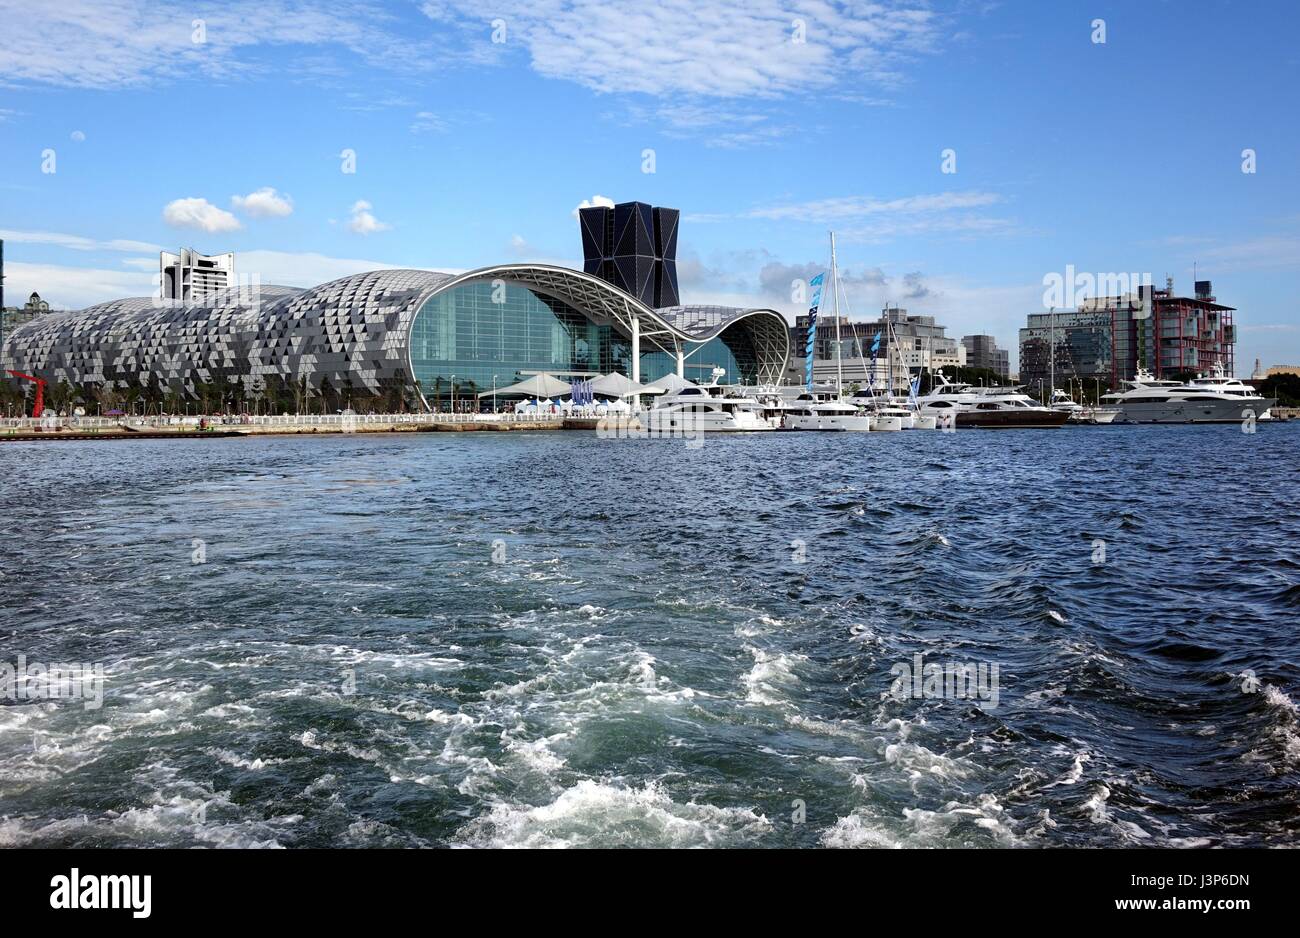 KAOHSIUNG, TAIWAN -- MAY 11, 2014: The newly opened Kaohsiung Exhibition Center during the 2014 Taiwan International Boat Show. Stock Photo